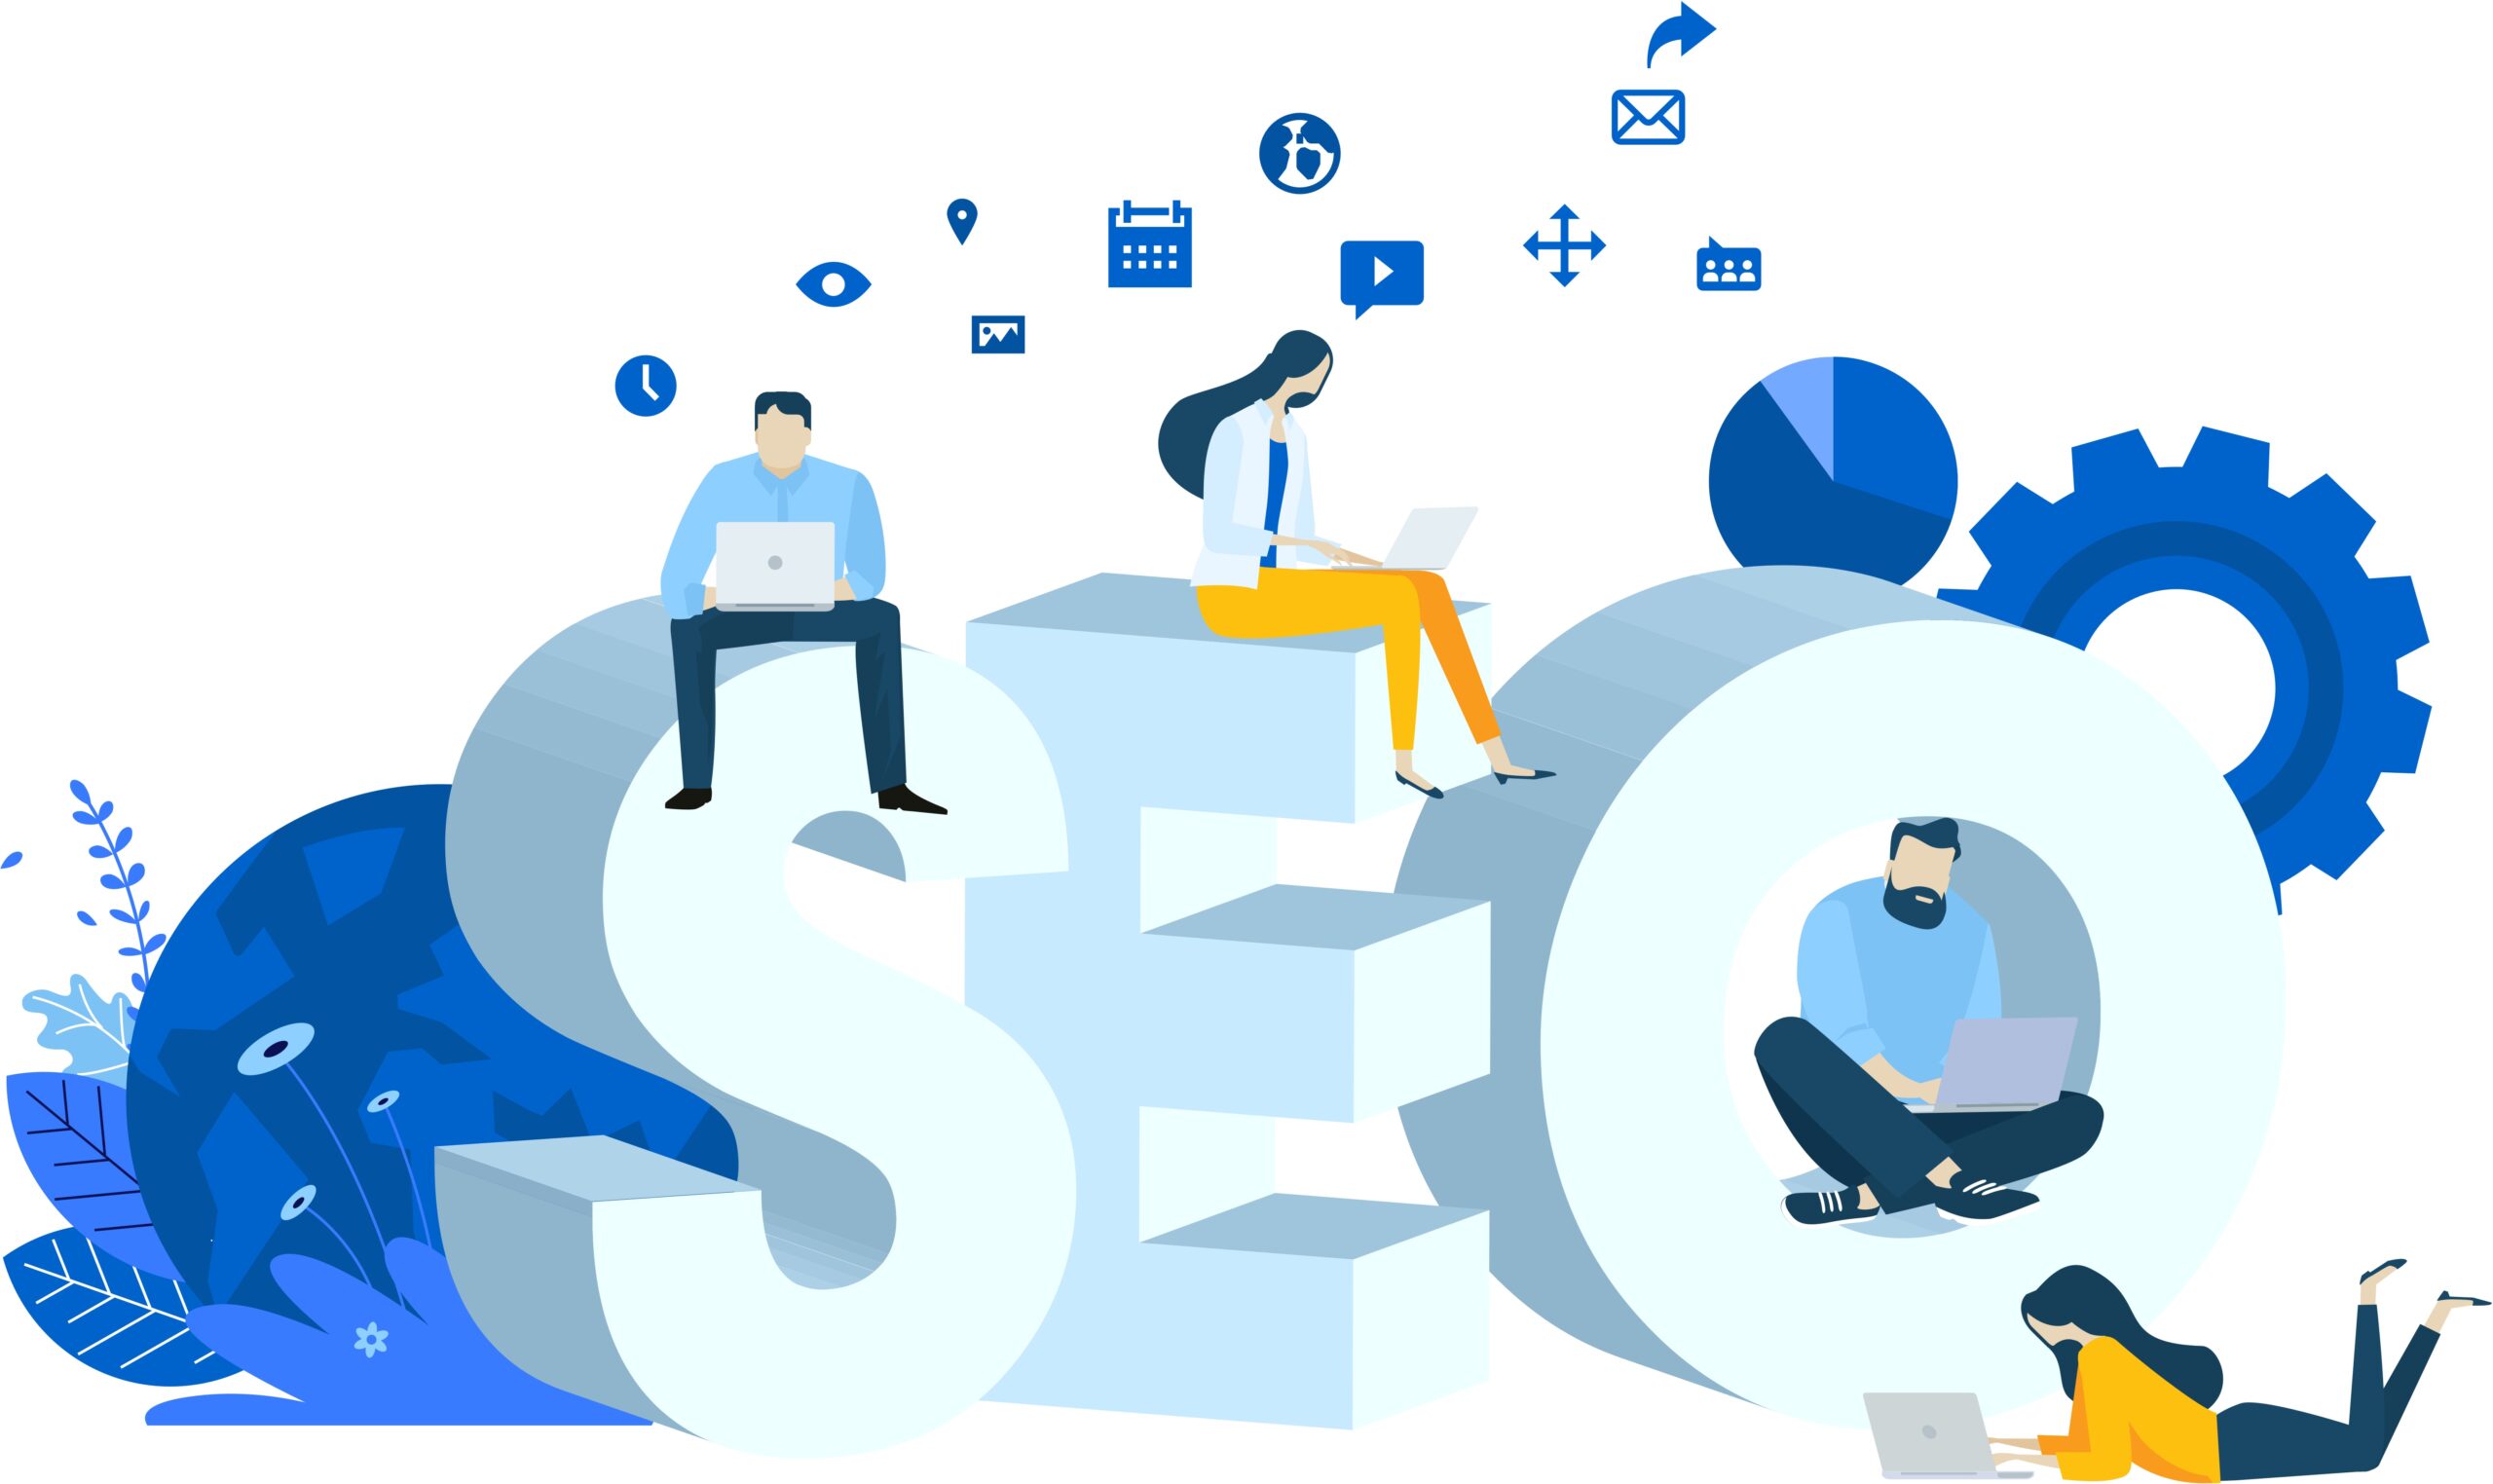 Off page SEO package | SEO written in 3D text, experts are sutting on giant letters